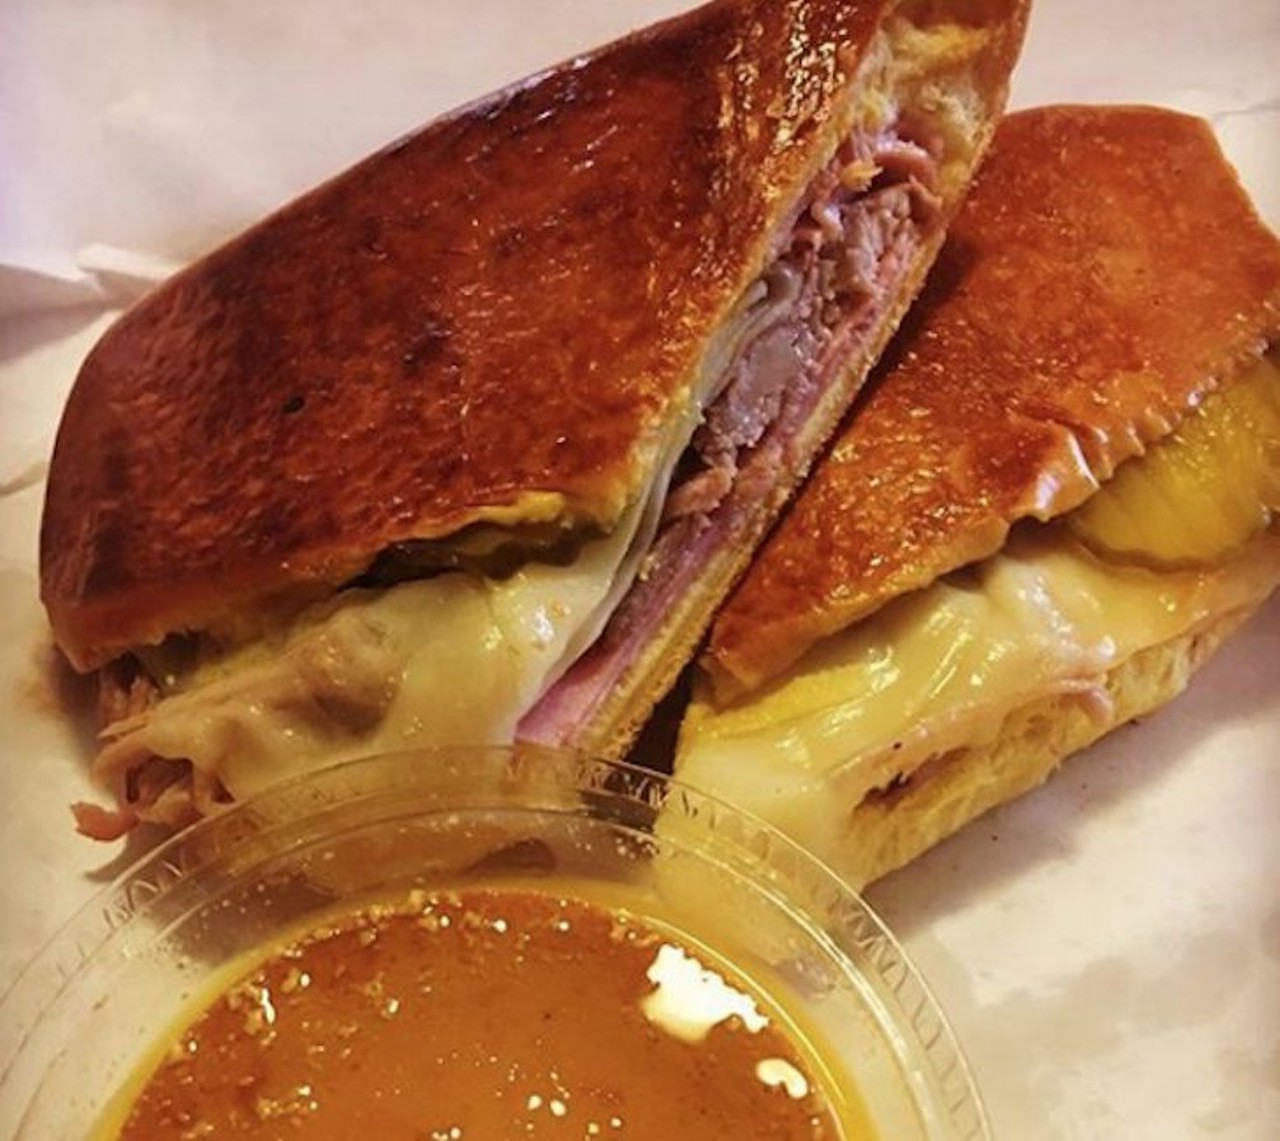 Cindy&#146;s Caf&eacute;
Right across from Florida Hospital on North Orange Avenue, Cindy's slings superior Cuban fare. Give the tripleta sandwich a try for $8 &#150; steak, oven roasted pork, ham, potato sticks and "mayoketchup" (a pink sauce made of, yep, mayonnaise and ketchup).
Photo via  tsprouse/Instagram